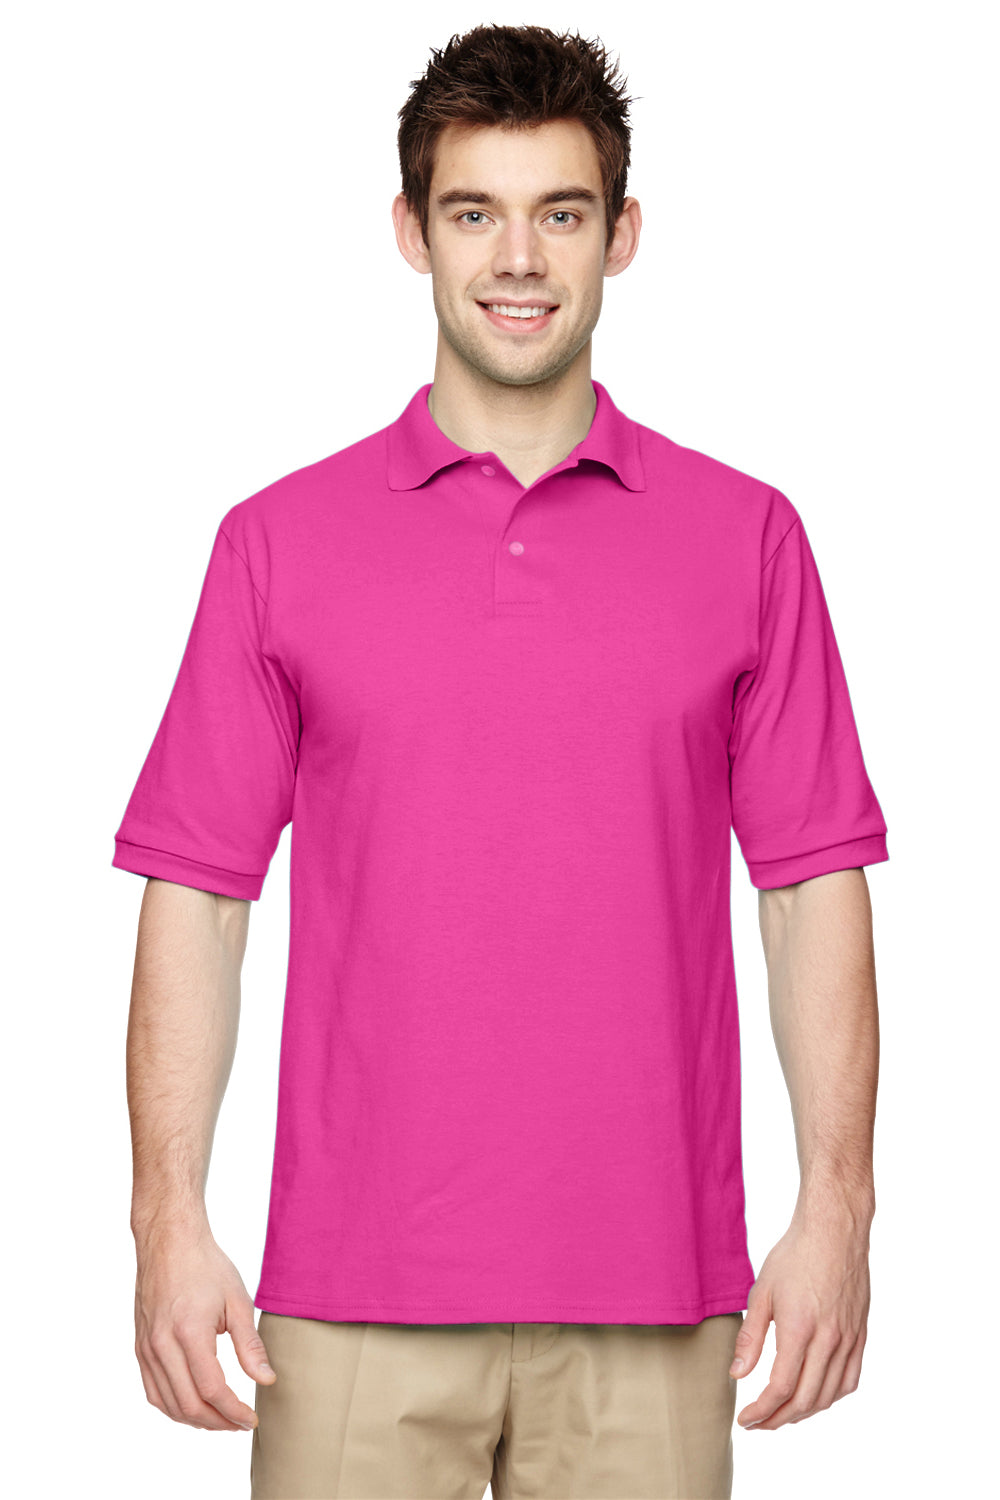 Jerzees 437 Mens SpotShield Stain Resistant Short Sleeve Polo Shirt Cyber Pink Front